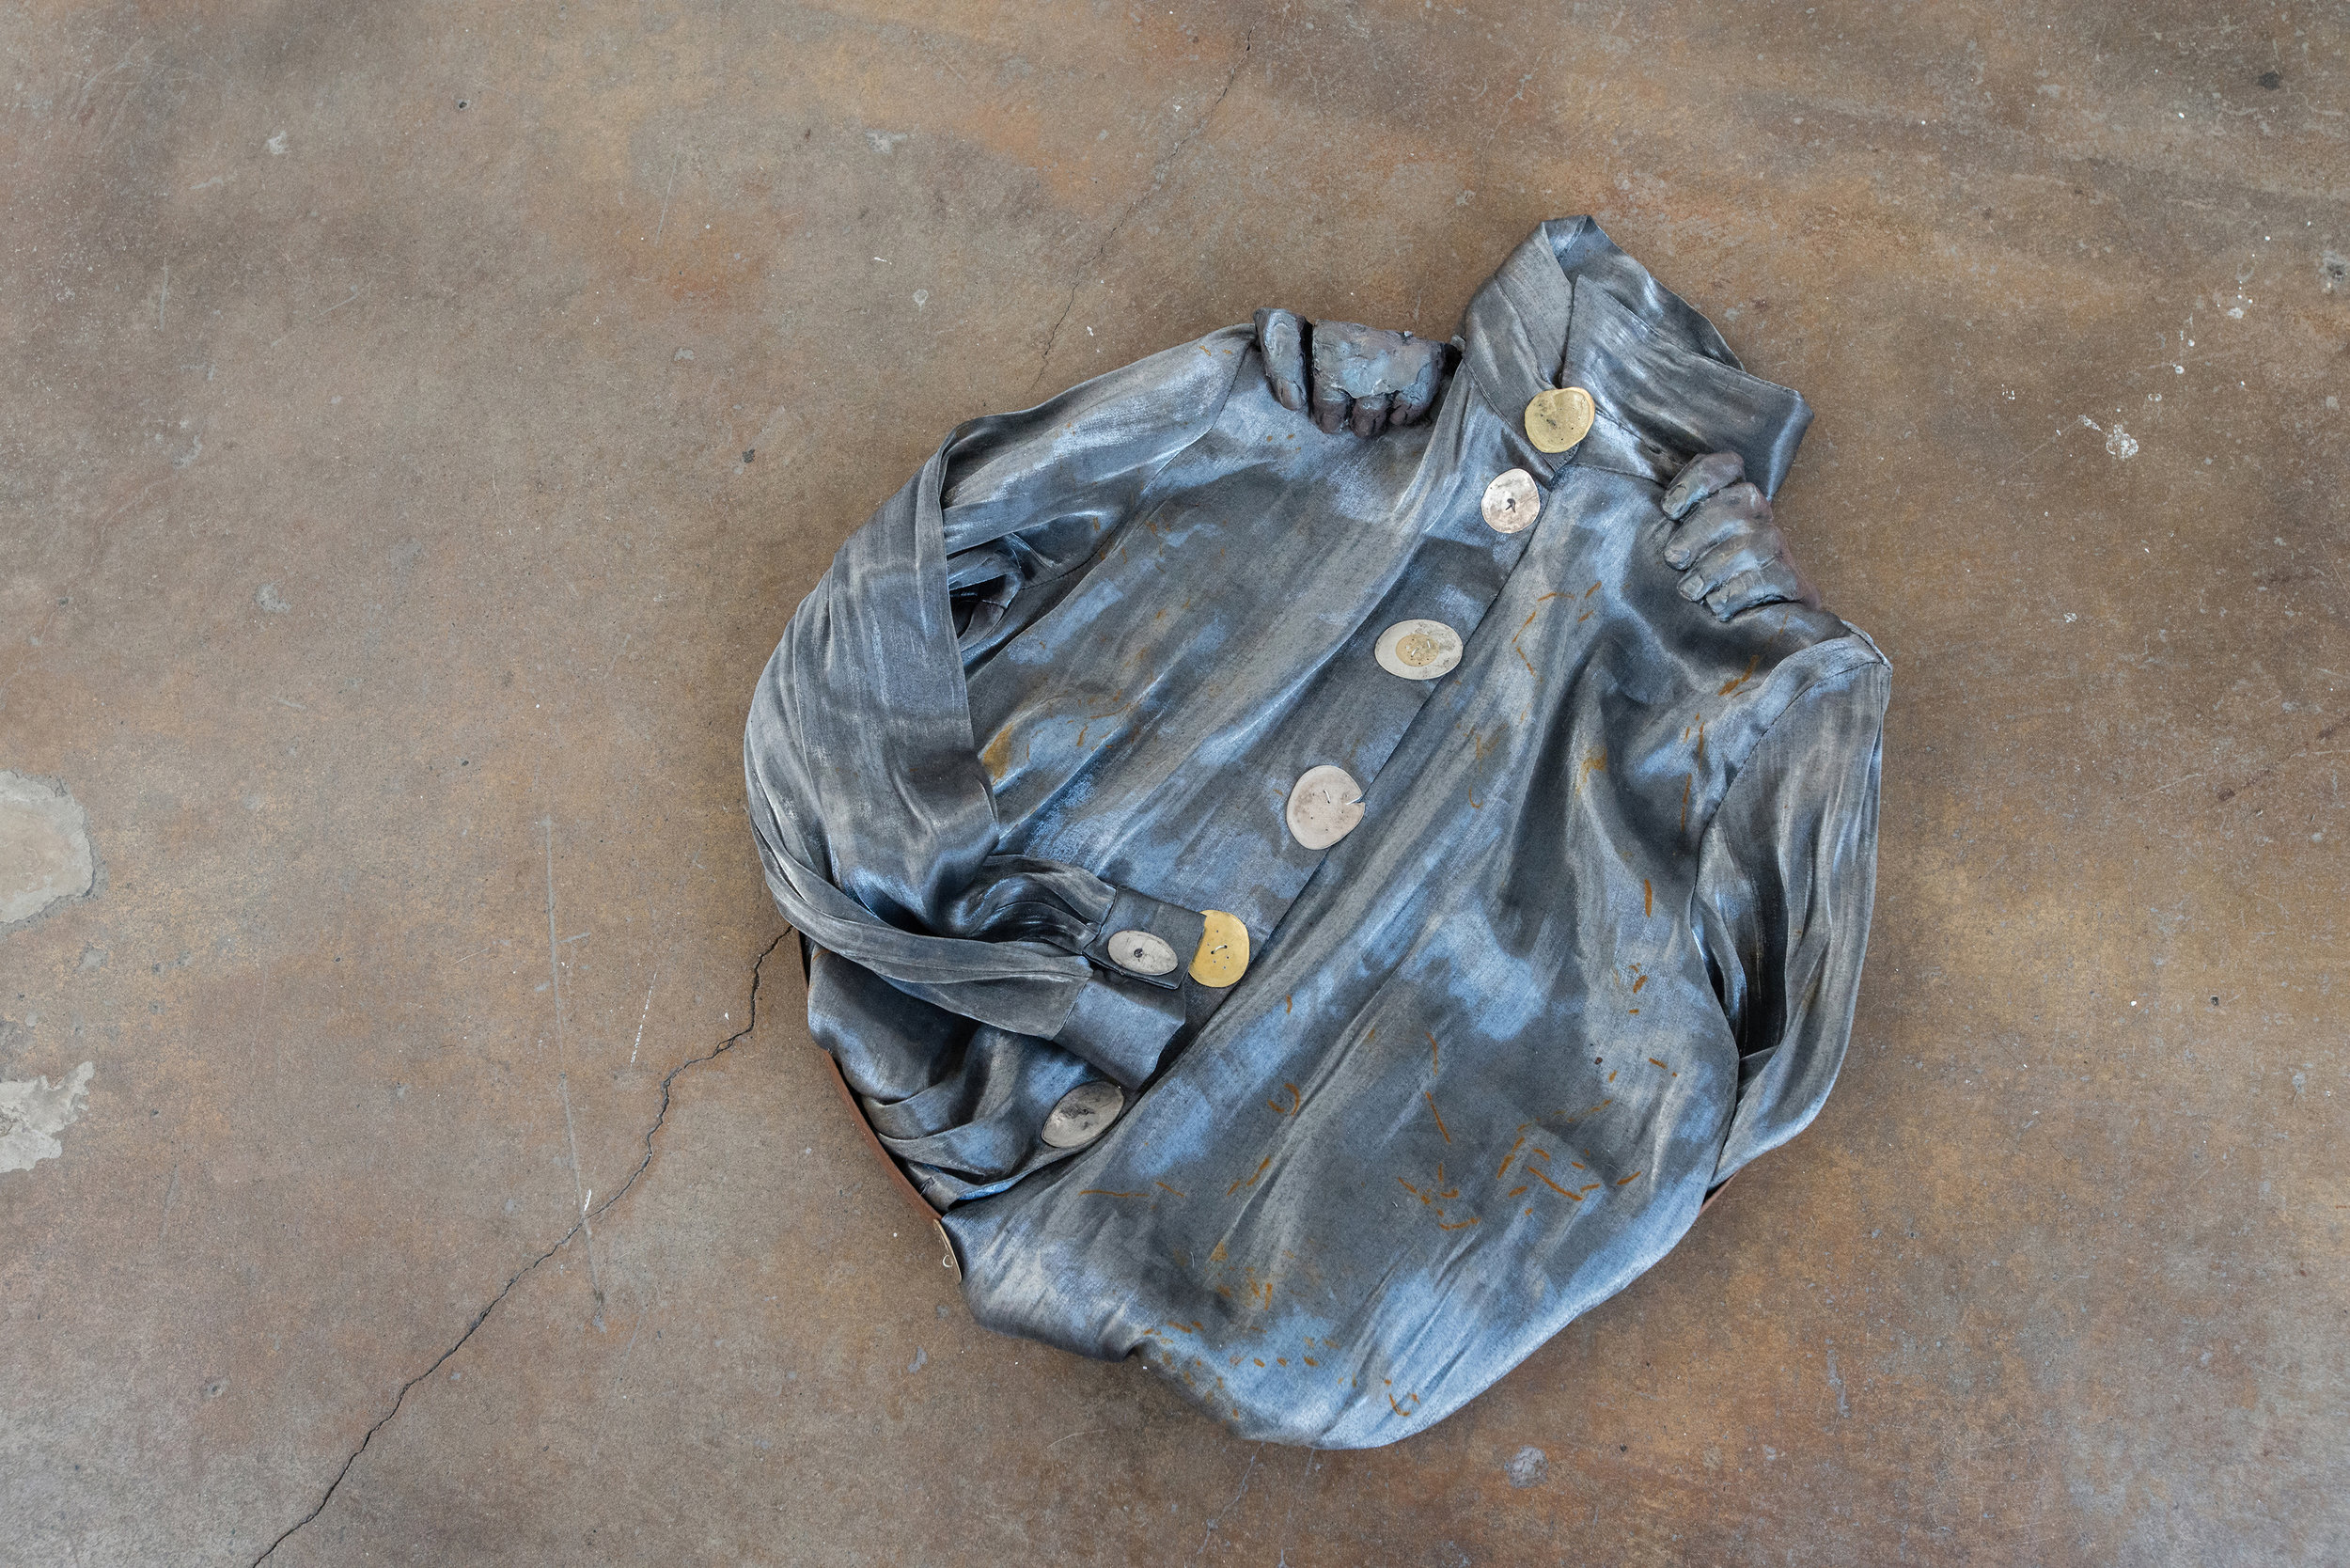  Jenine Marsh,  contortion (steel) , 2018. Found metal ring, rust-stained blouse, train-flattened and drilled coins of mixed currencies, wire, gypsum cement, powdered pigment     